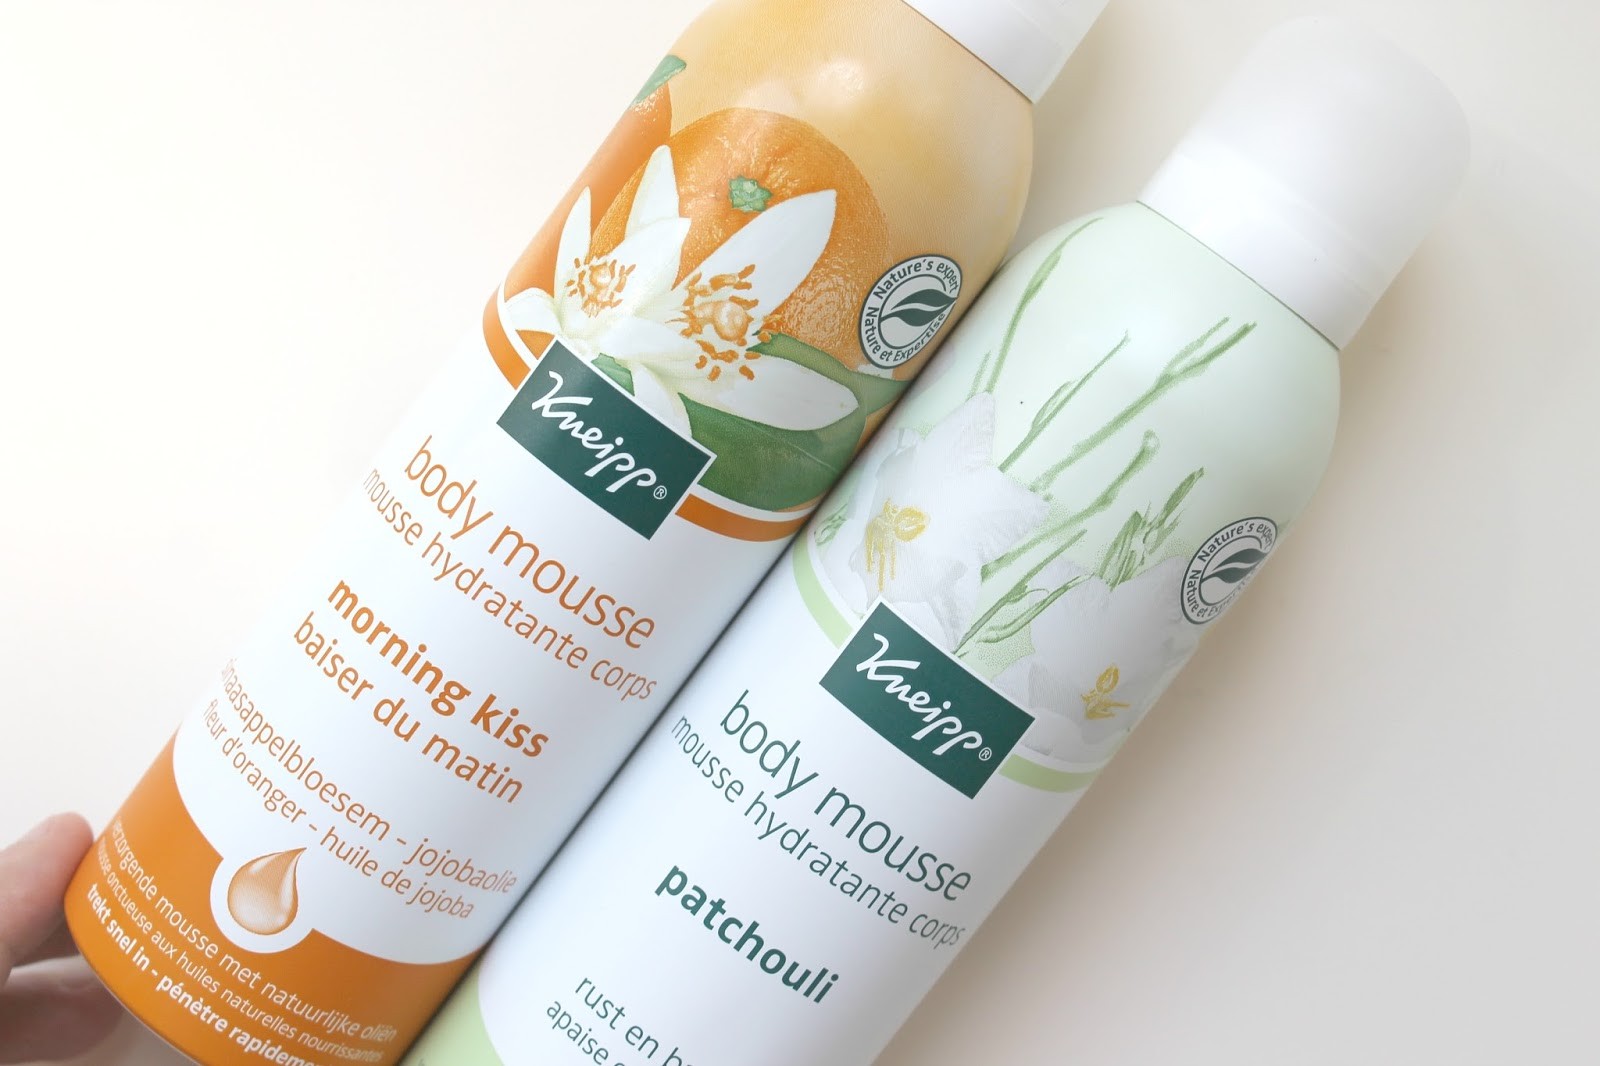 Kneipp body mousses morning kiss patchouli